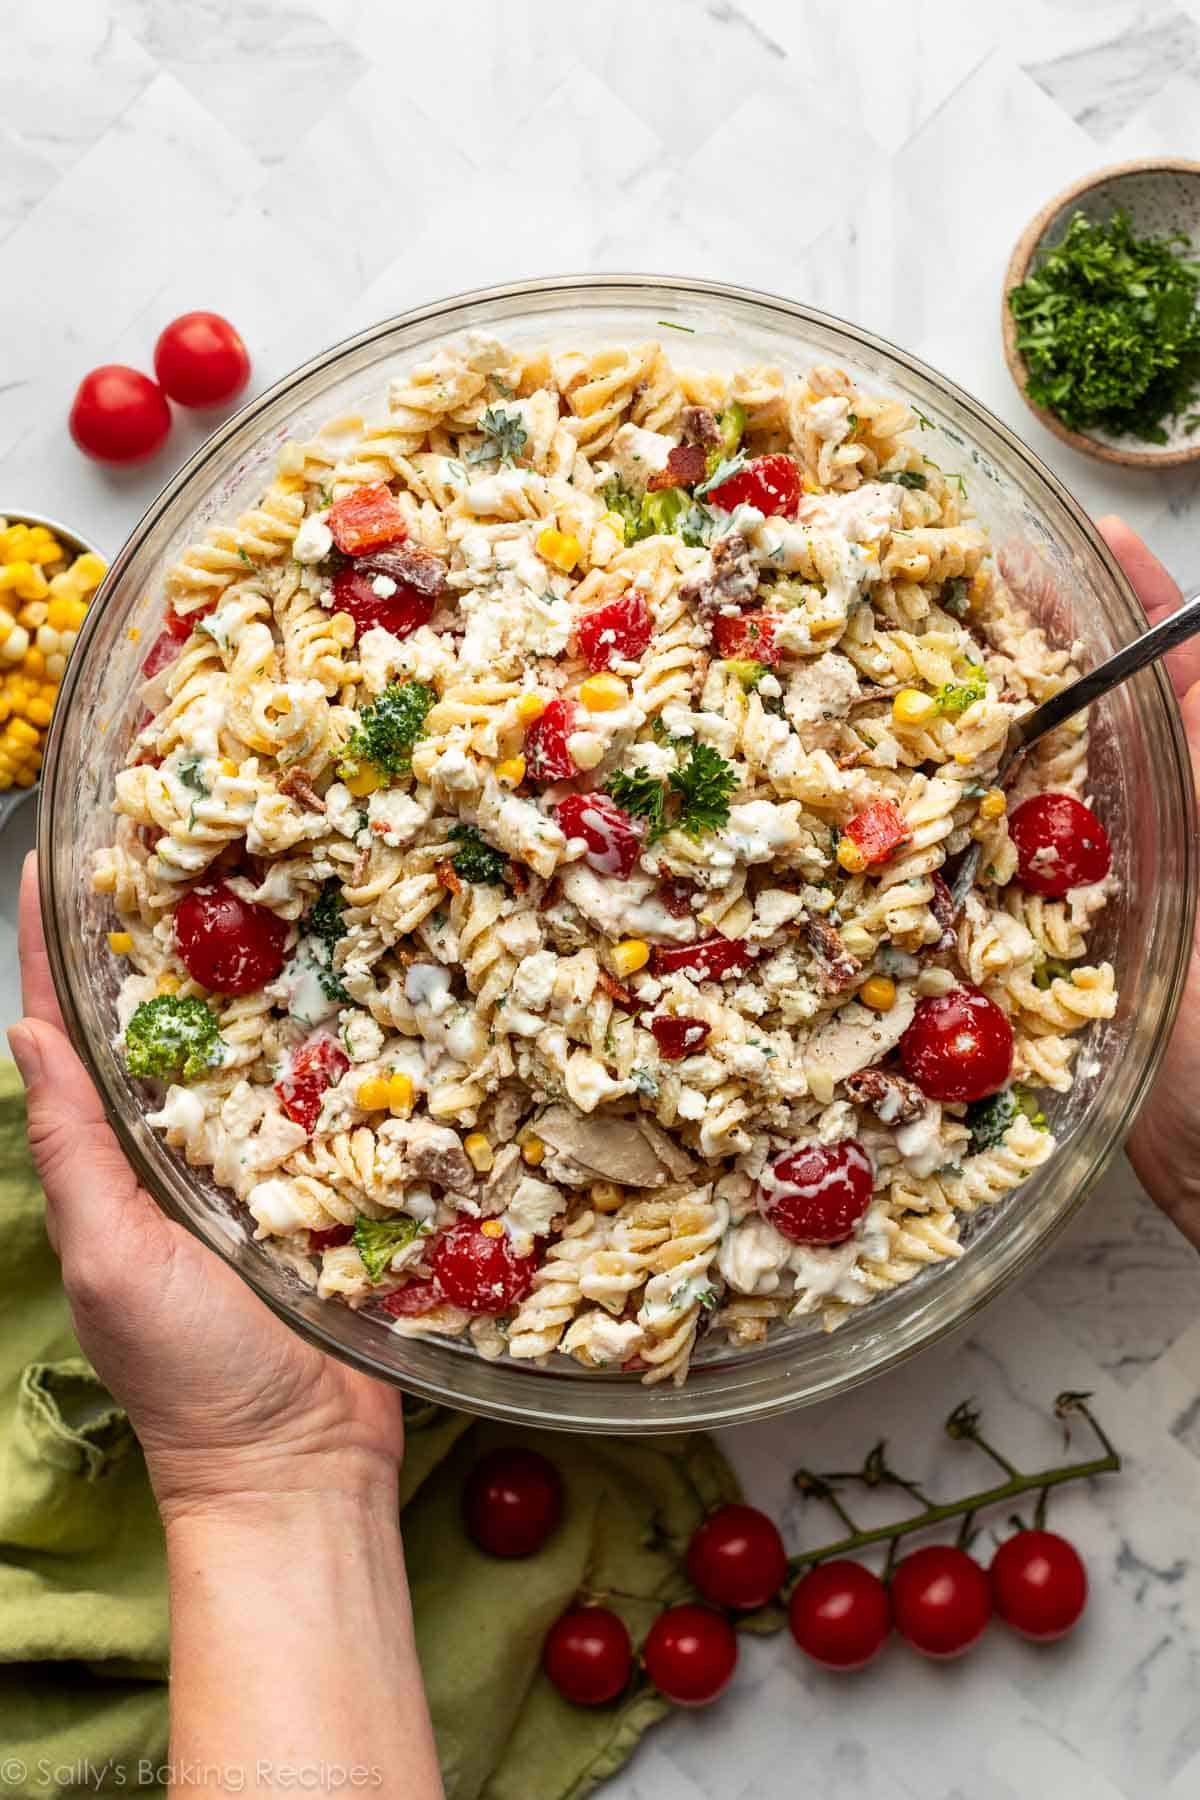 hands picking up glass bowl of pasta salad with tomatoes, broccoli, corn, and red bell peppers.